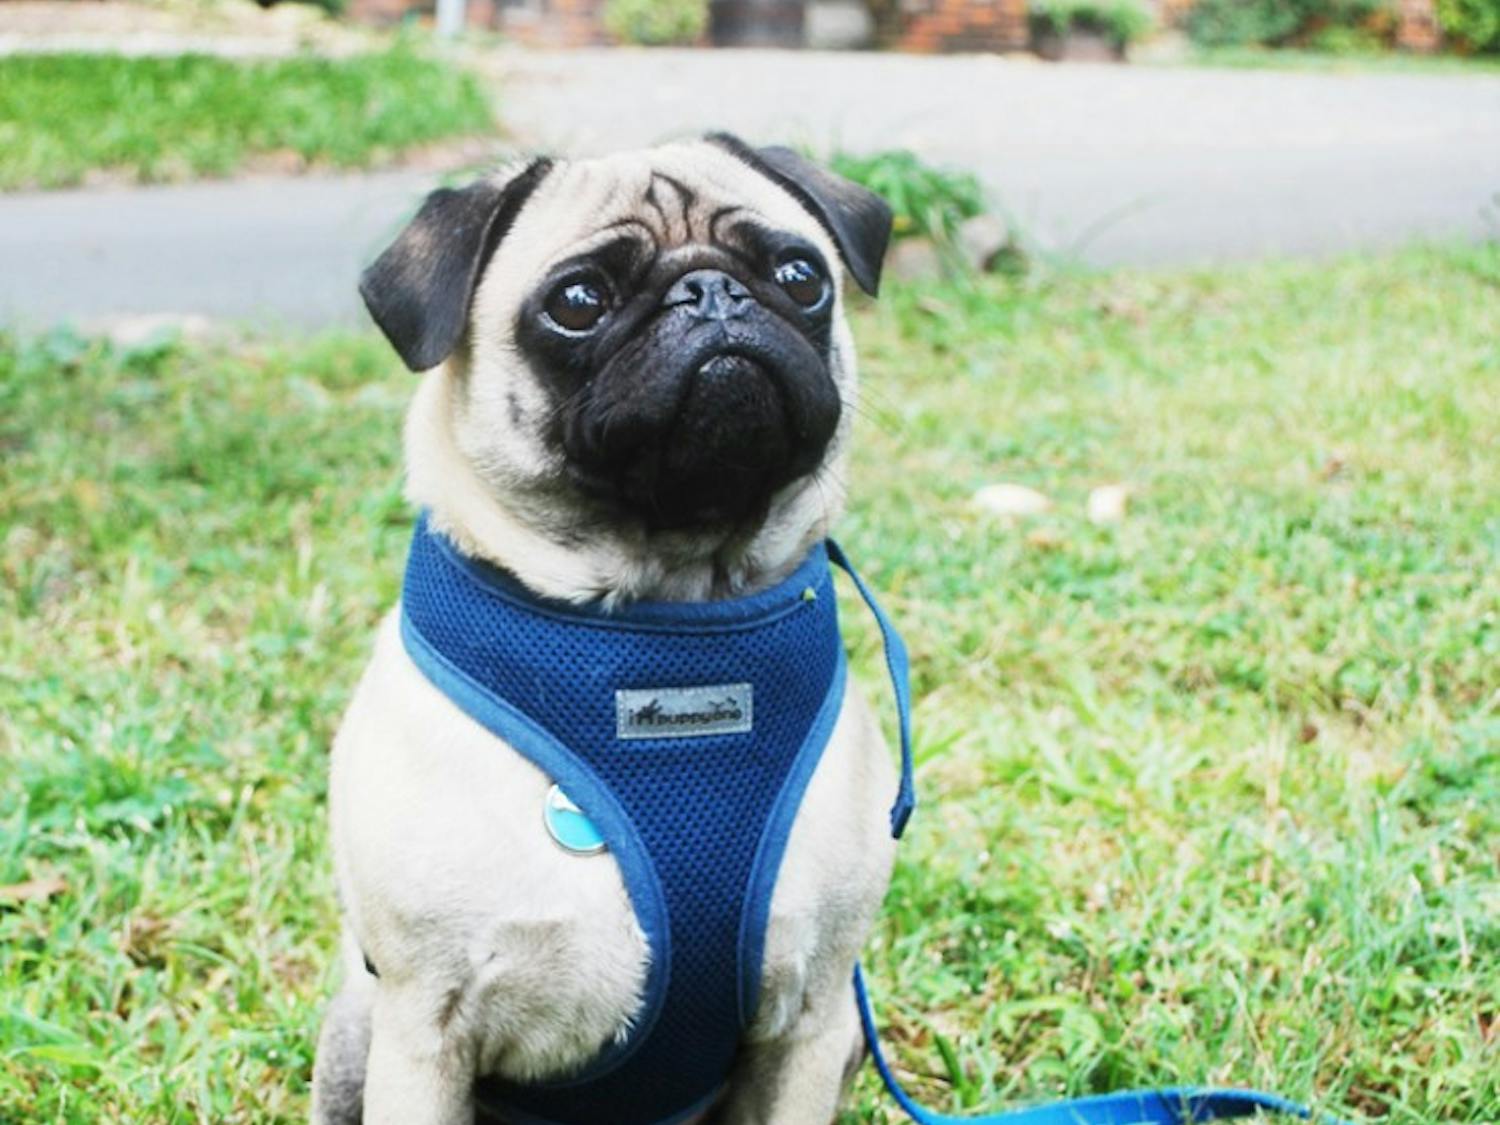 Pug Thadeus (aka the dog in the pictures) is put in a harness in his front yard by his owner Allison Tarr on Tuesday, September 13 on Dogwood Lane in Chapel Hill